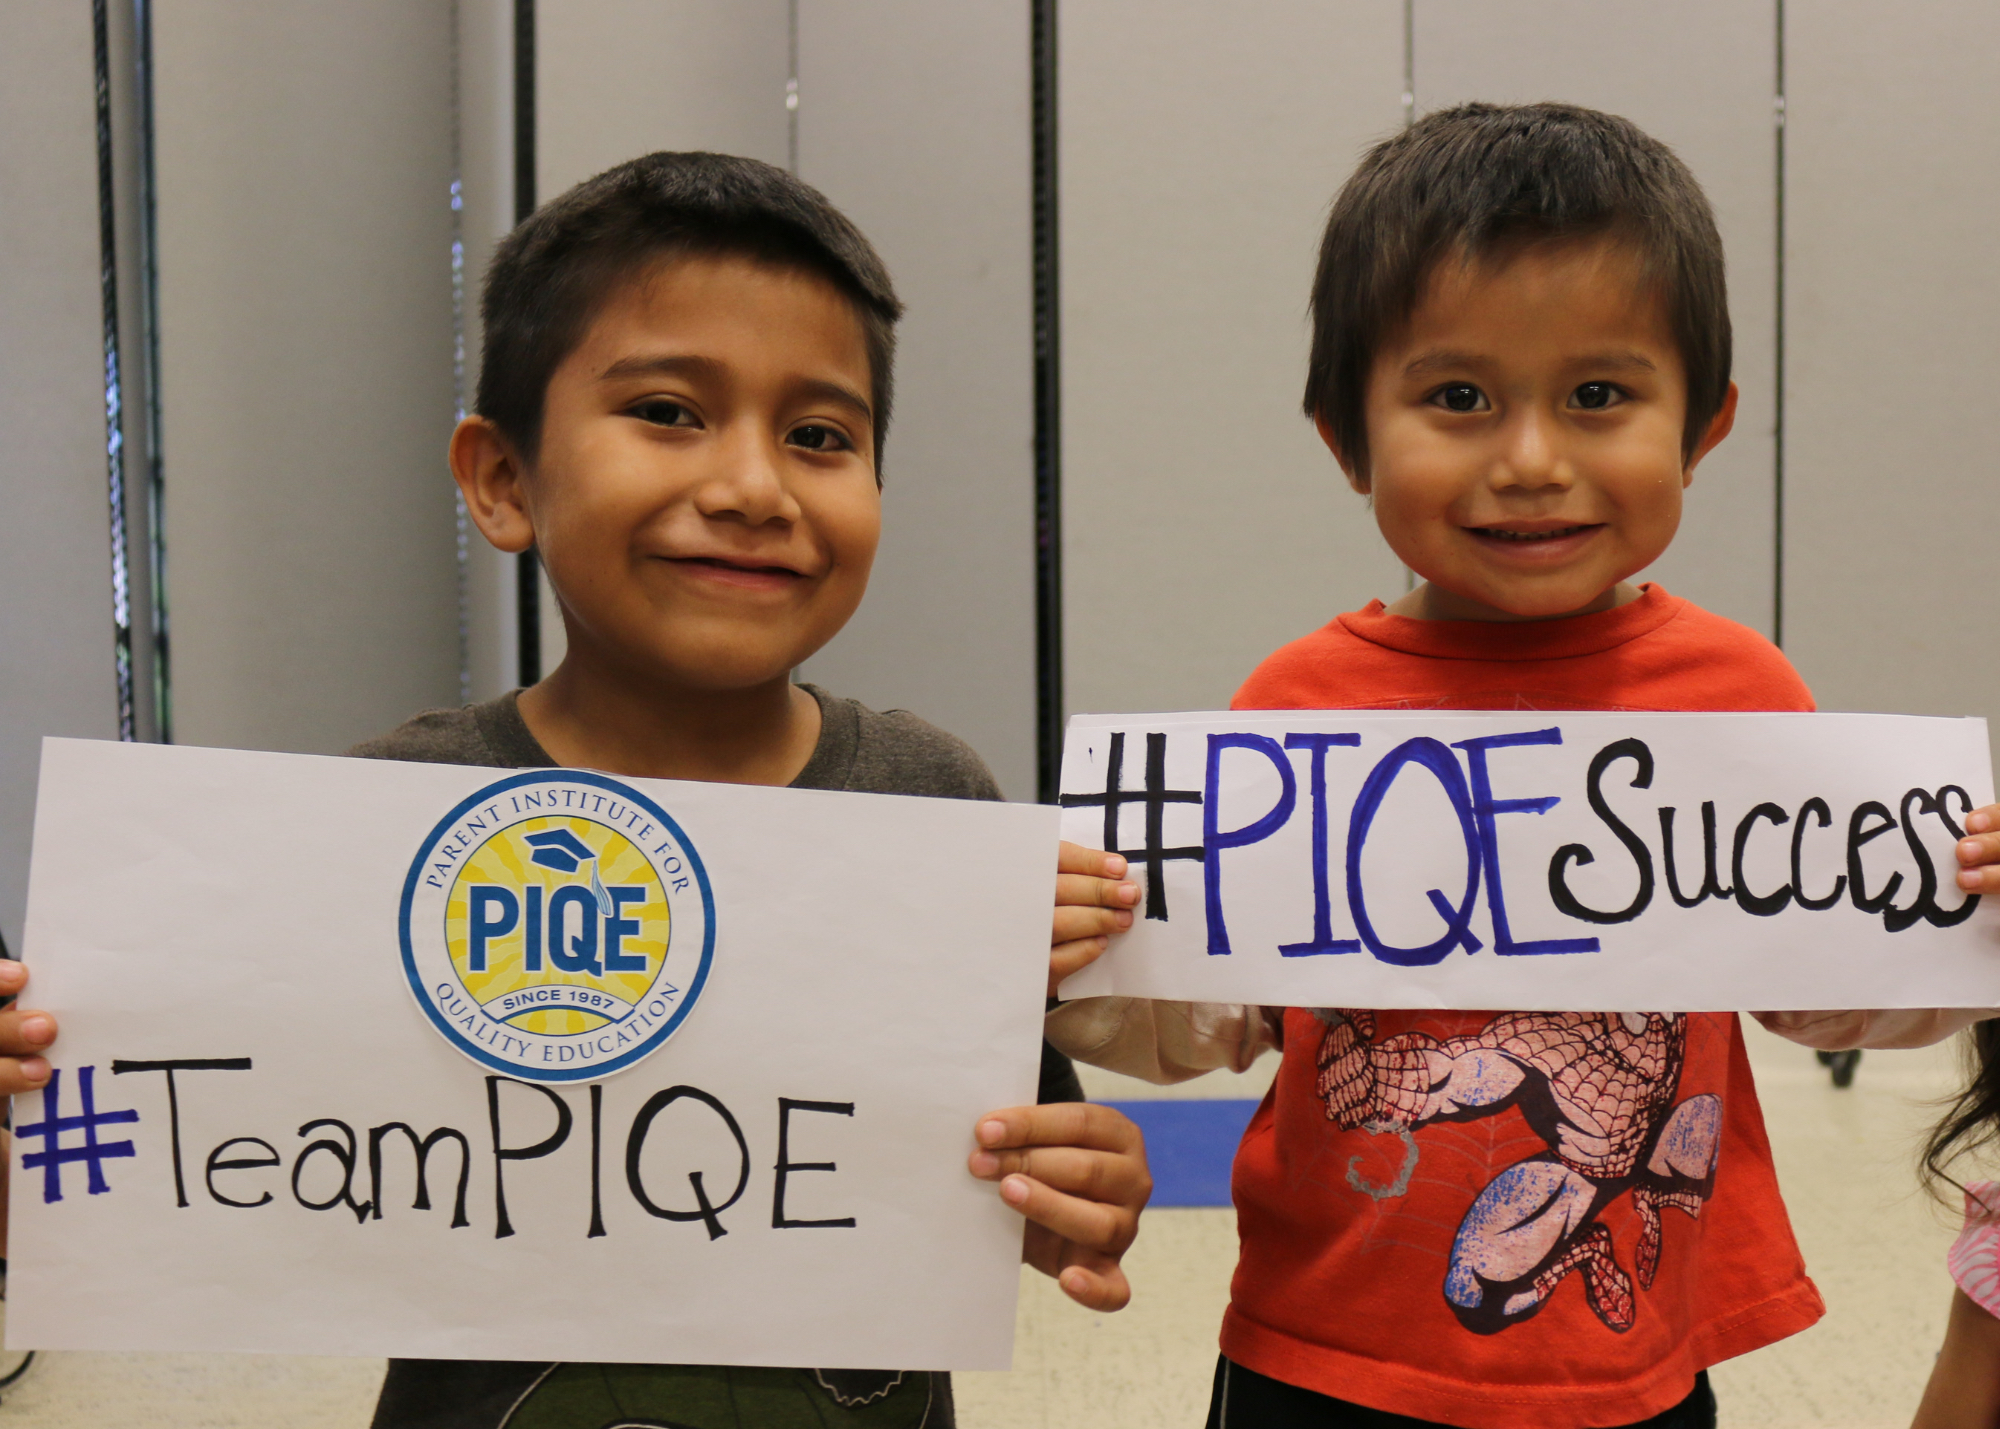 Boys holding PIQE sign